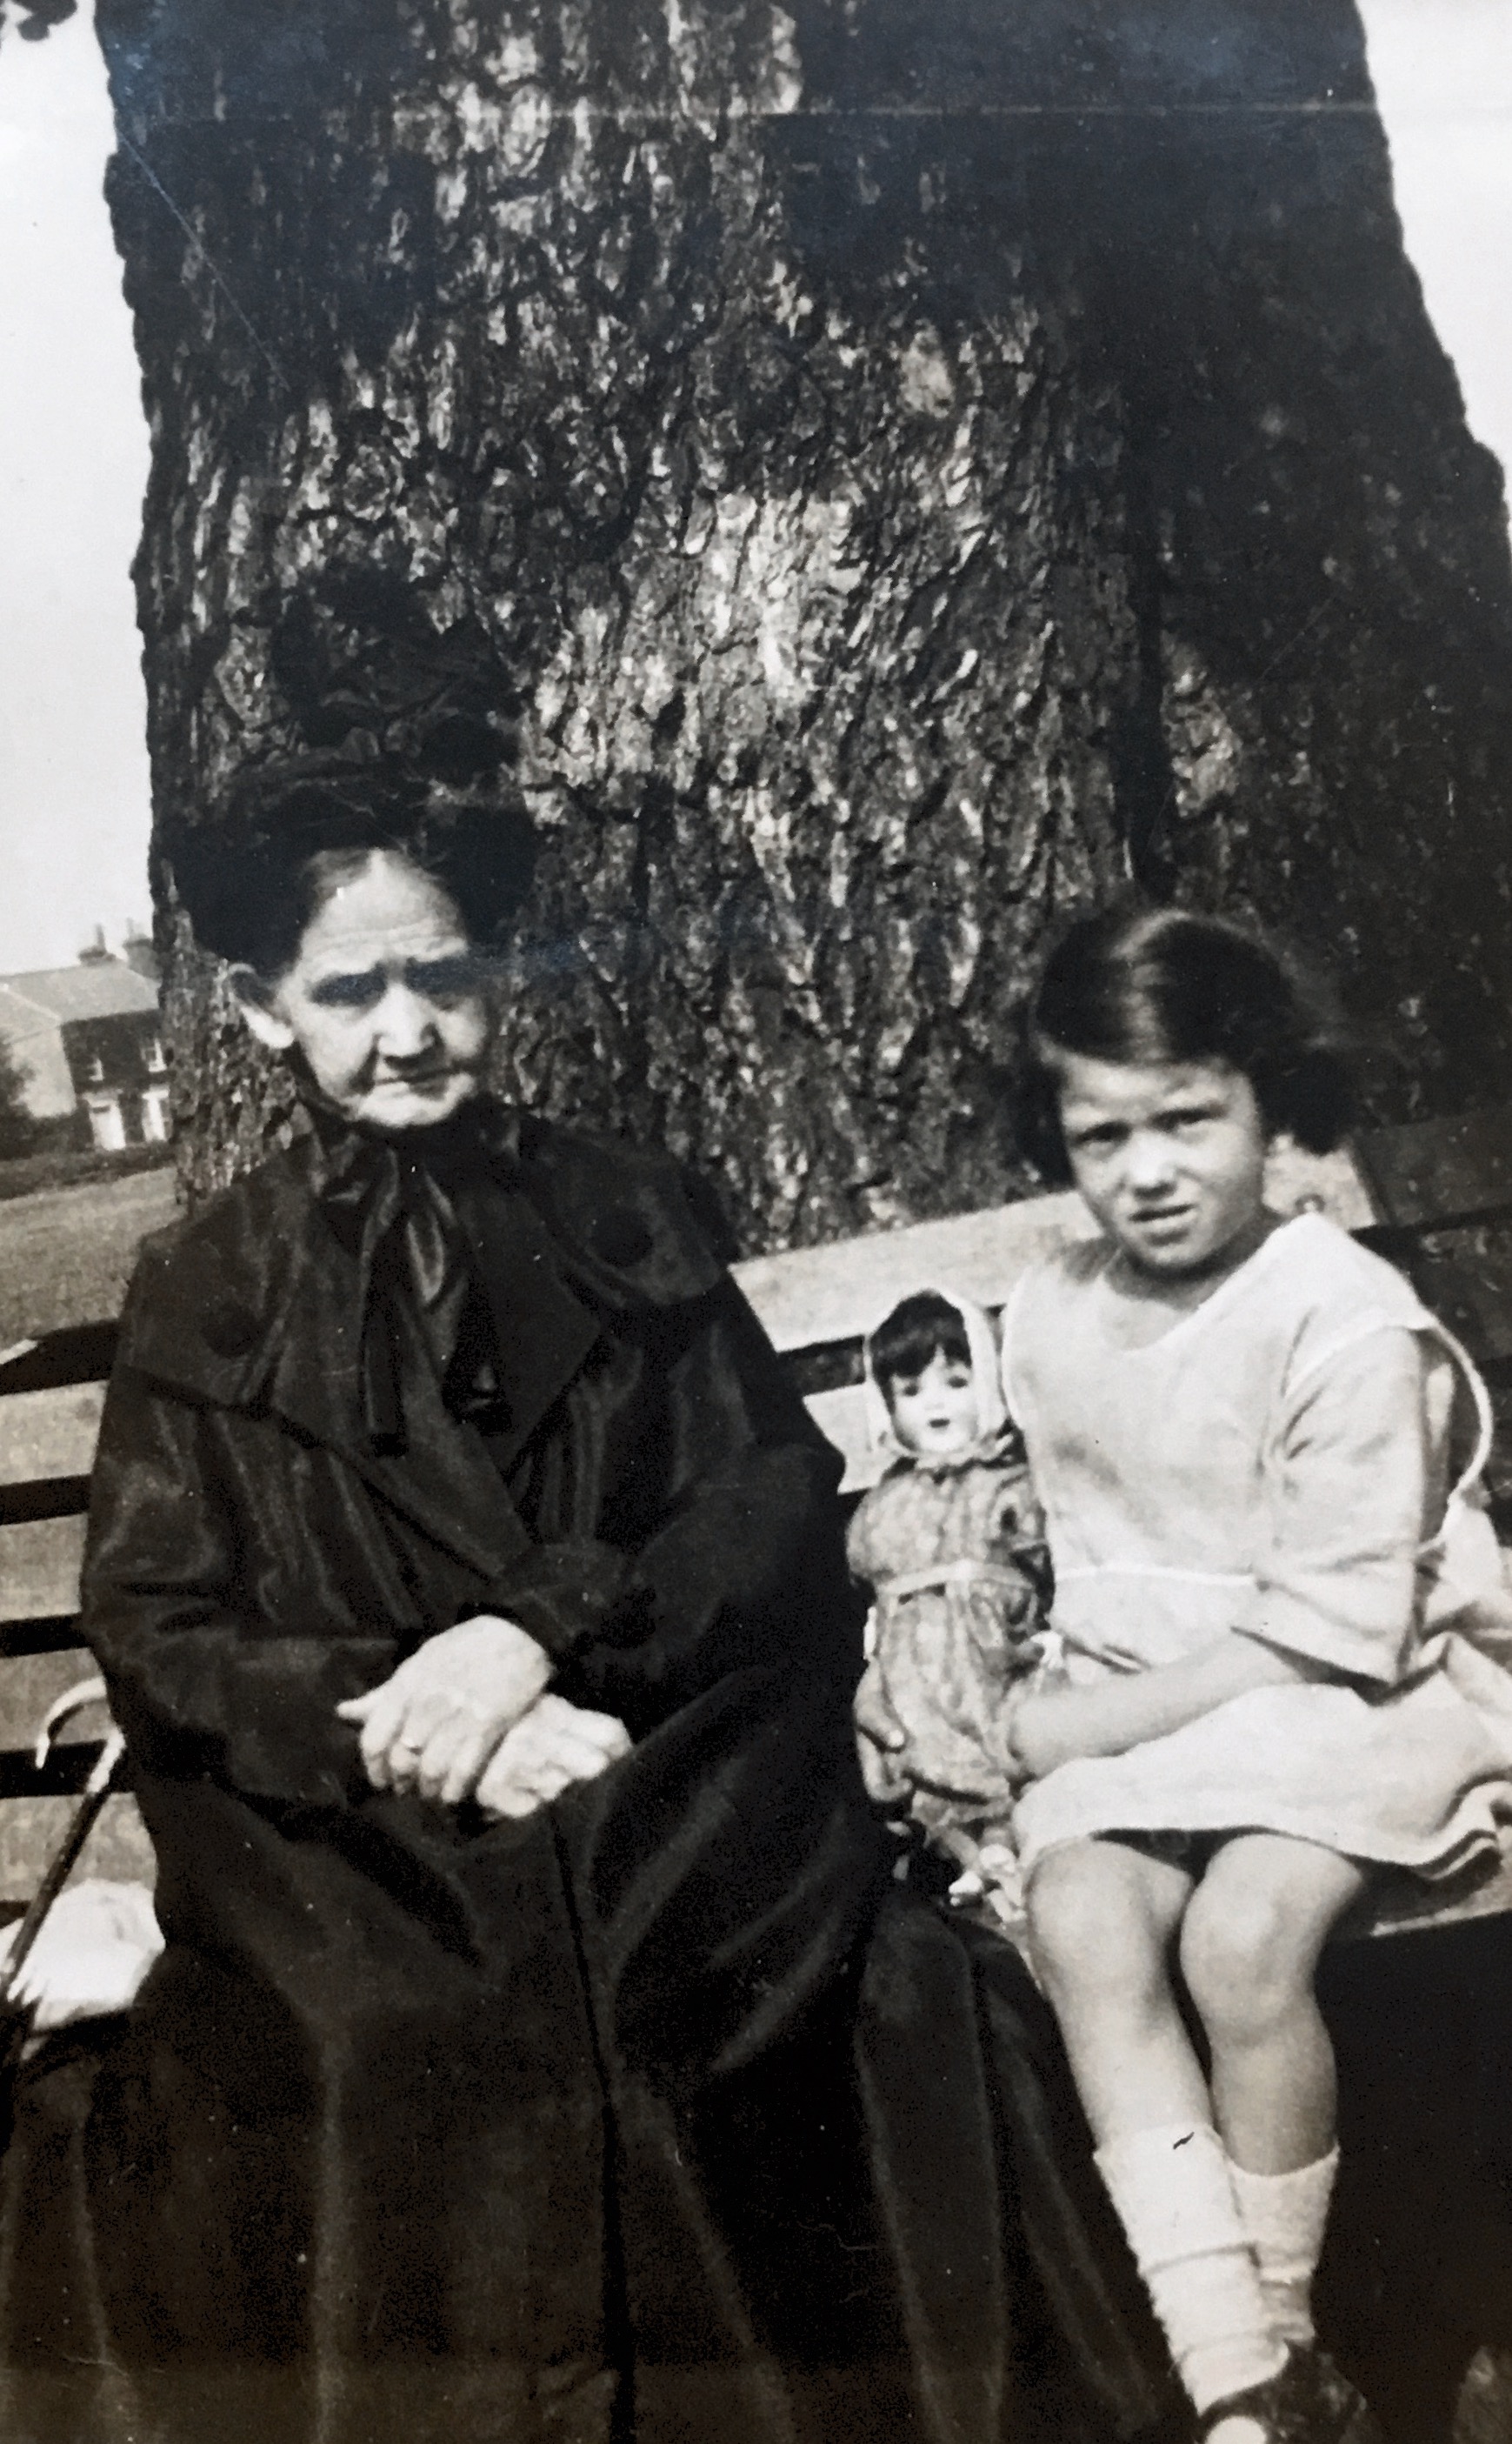 Susie Gordon born 1917 with her great grandma Mary Ann Bywater born in 1849